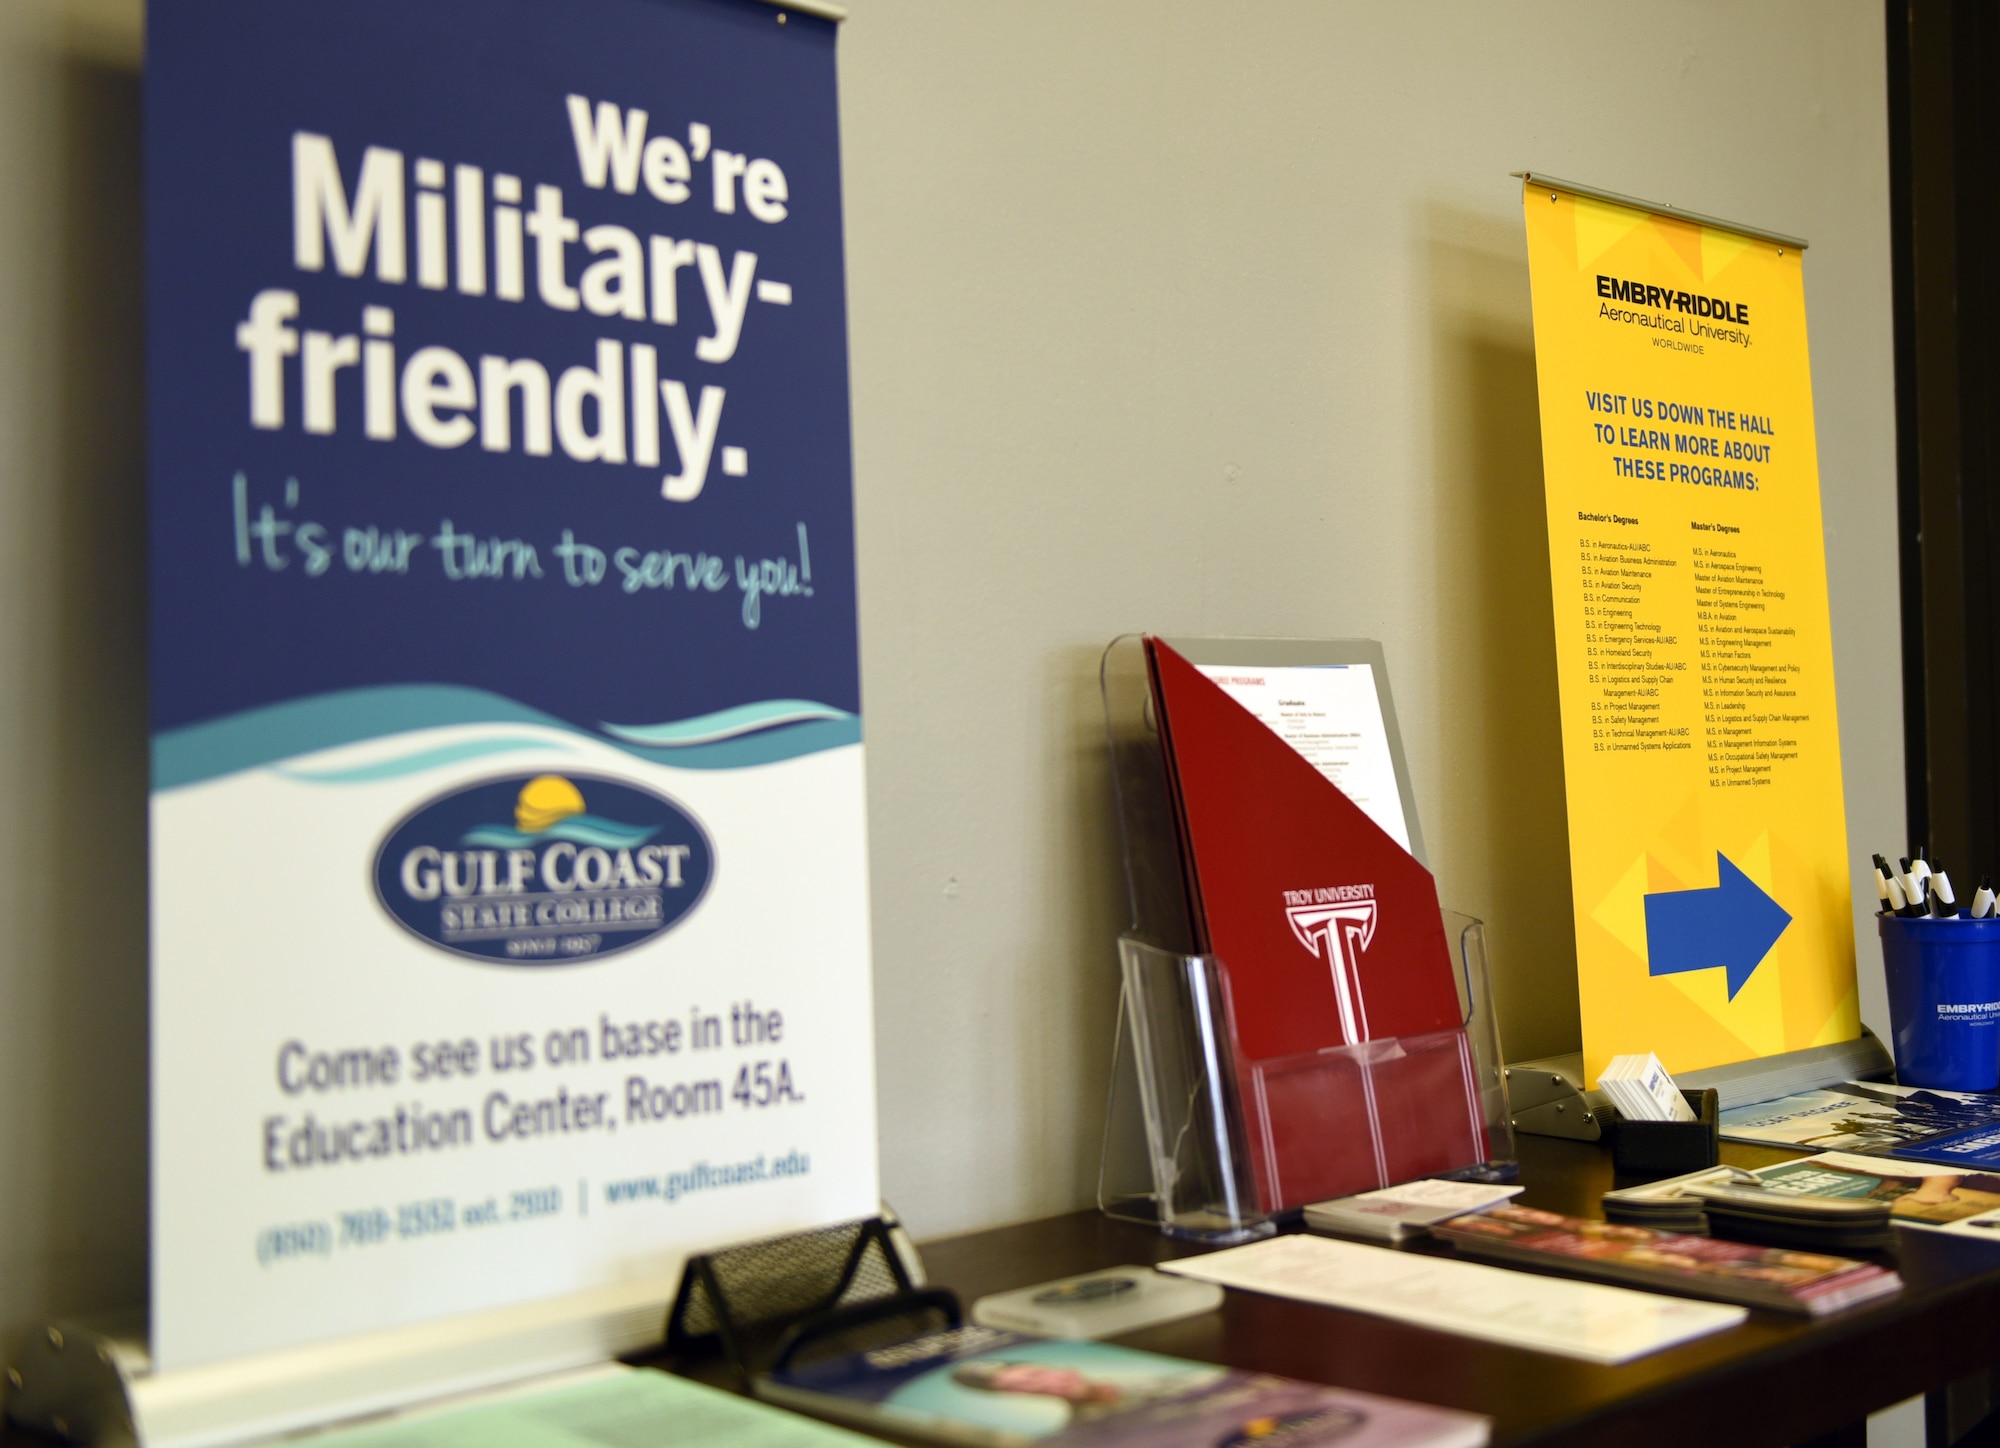 Informational brochures from three schools line a table in the education office at Tyndall Air Force Base, Fla., Feb. 14, 2018. The Tyndall Education Office is partnered with Gulf Coast State College, Troy University and Embry-Riddle Aeronautical University by offering on-base programs to better aid Airmen in pursuing their education desires. (U.S. Air Force photo by Airman 1st Class Isaiah J. Soliz/Released)